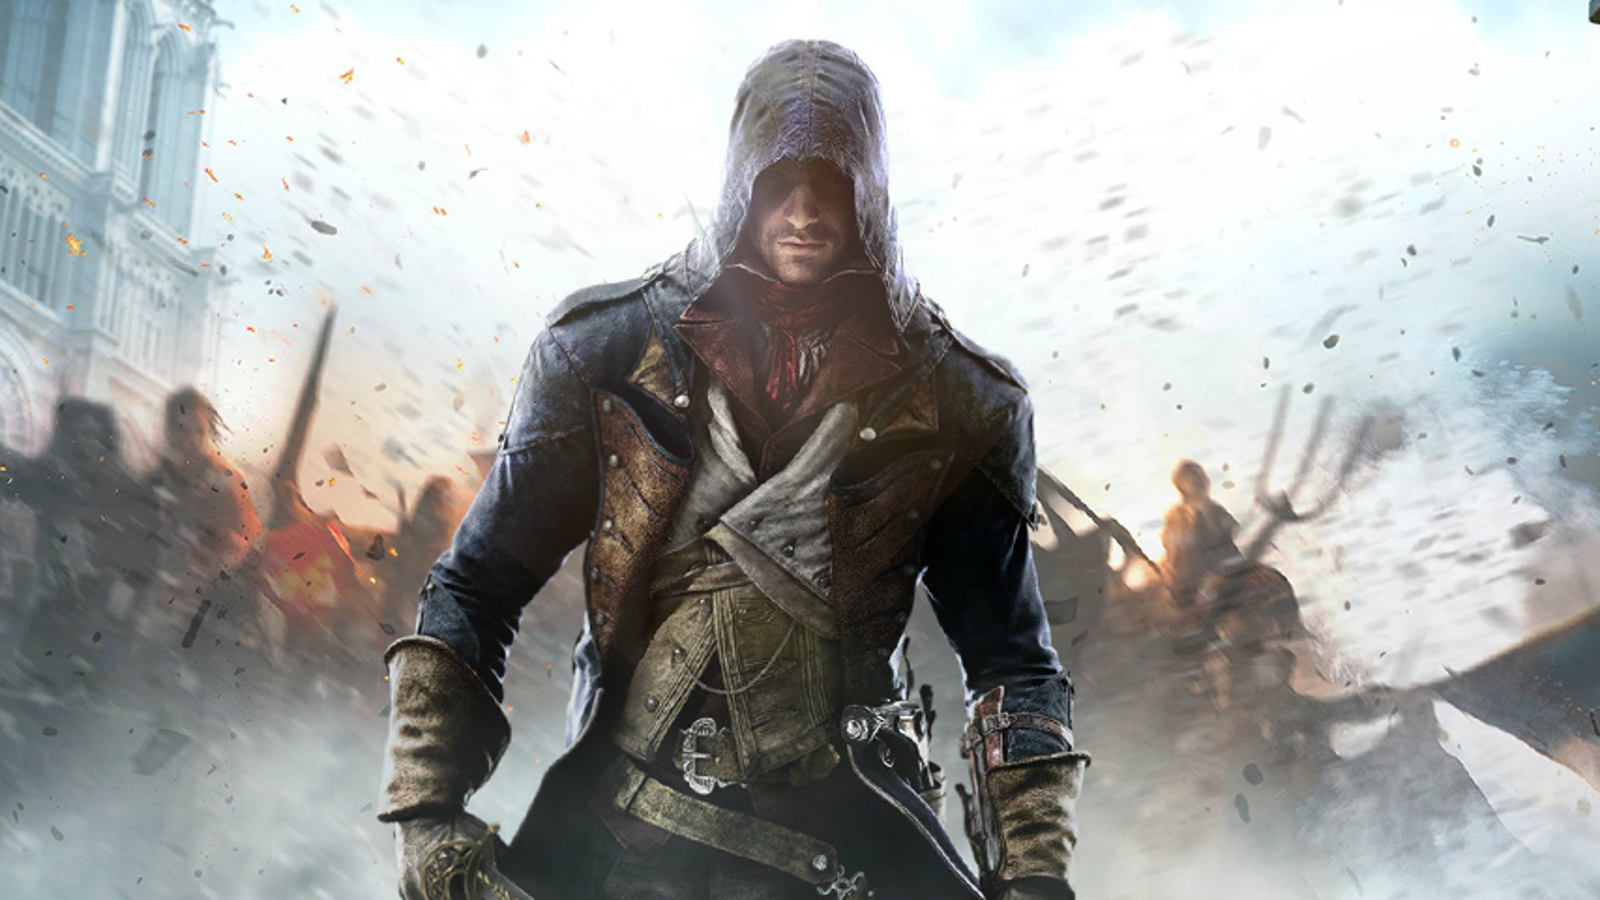 Assassin's Creed Unity System Requirements